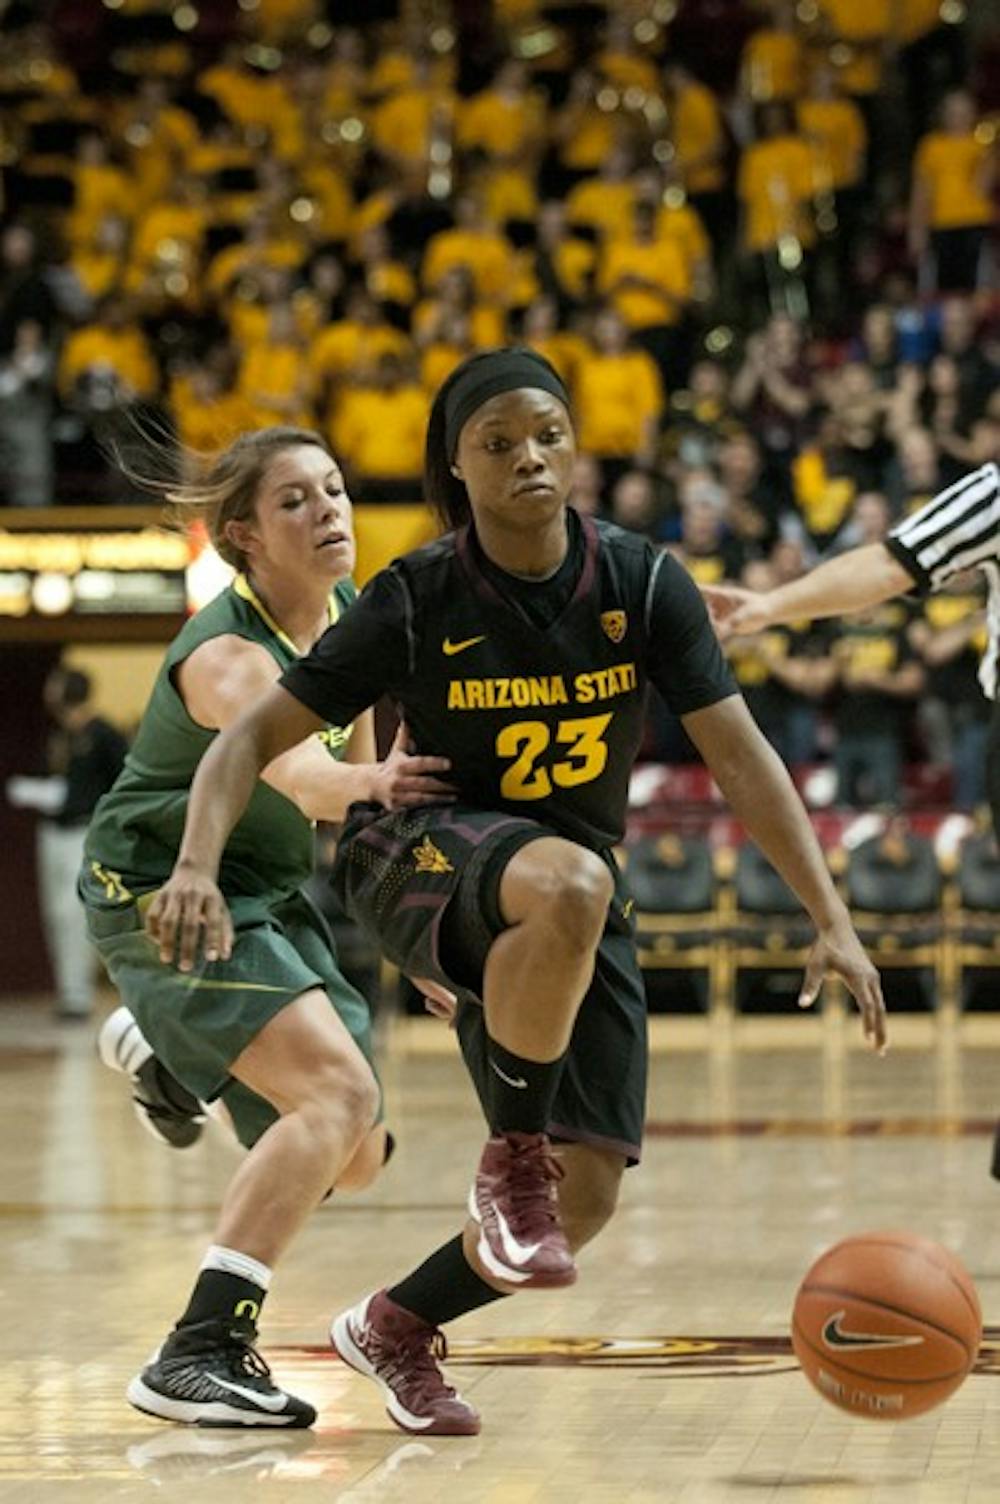 Freshman guard Elisha Davis blows past an Oregon defender on Jan. 11. The ASU women’s basketball team hopes to get past USC and UCLA with some victories. (Photo by Molly J Smith)
